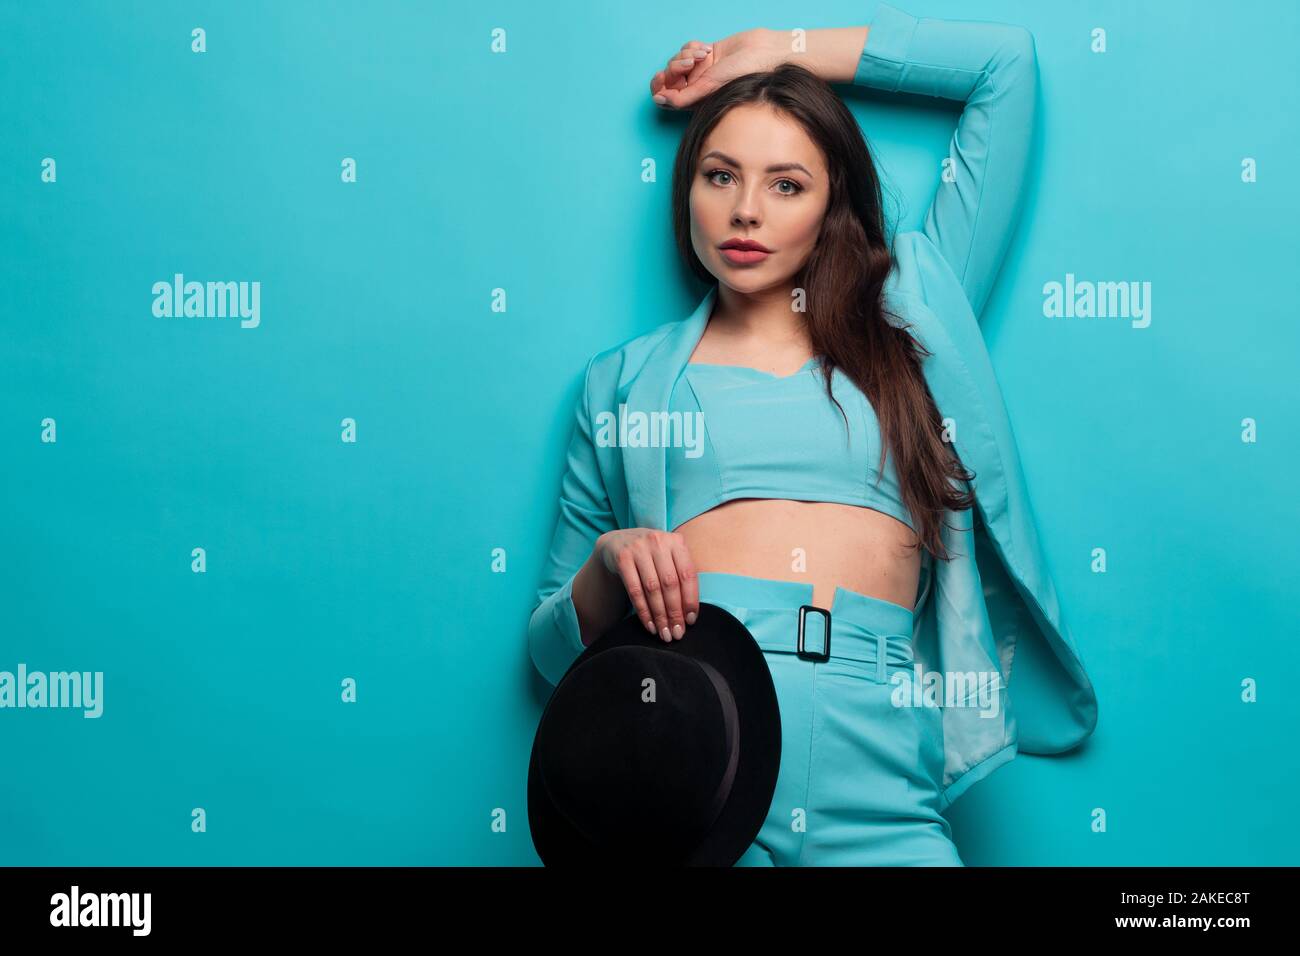 Beautiful and positive brunette in blue on a blue background. Stylish bright image in shades of turquoise. Girl in a jacket and top holding the hat. Stock Photo